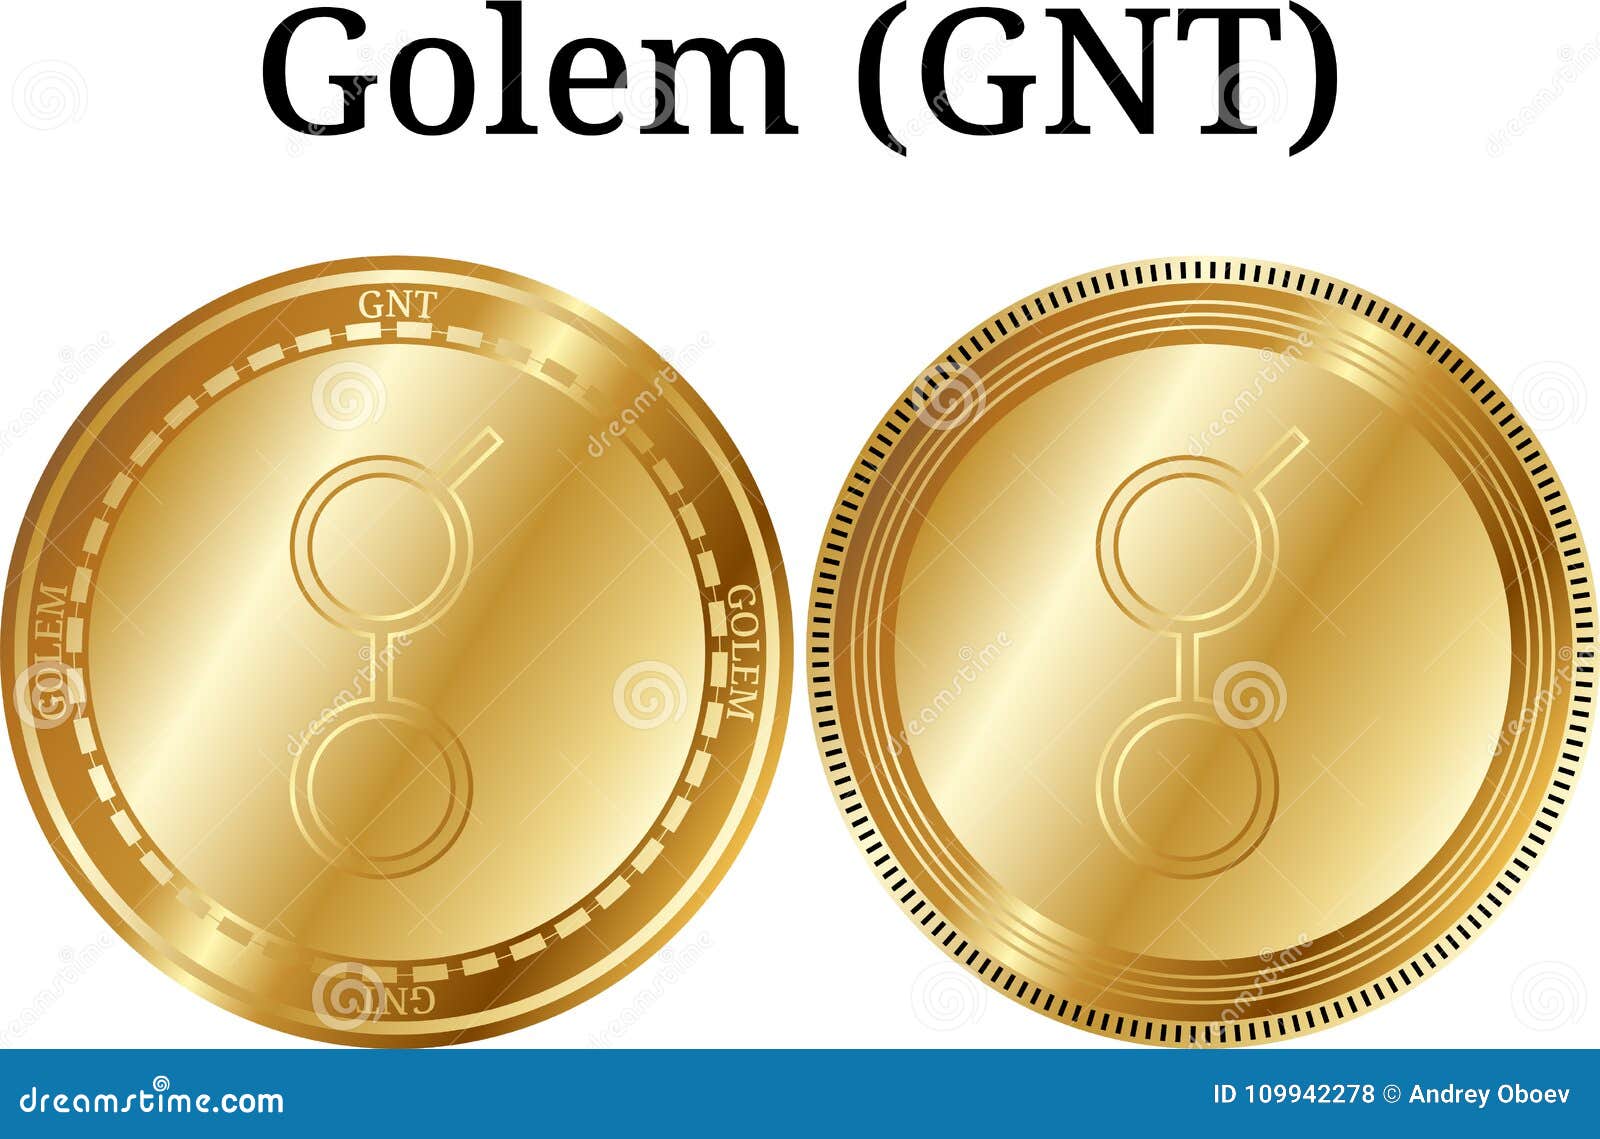 cryptocurrency gnt